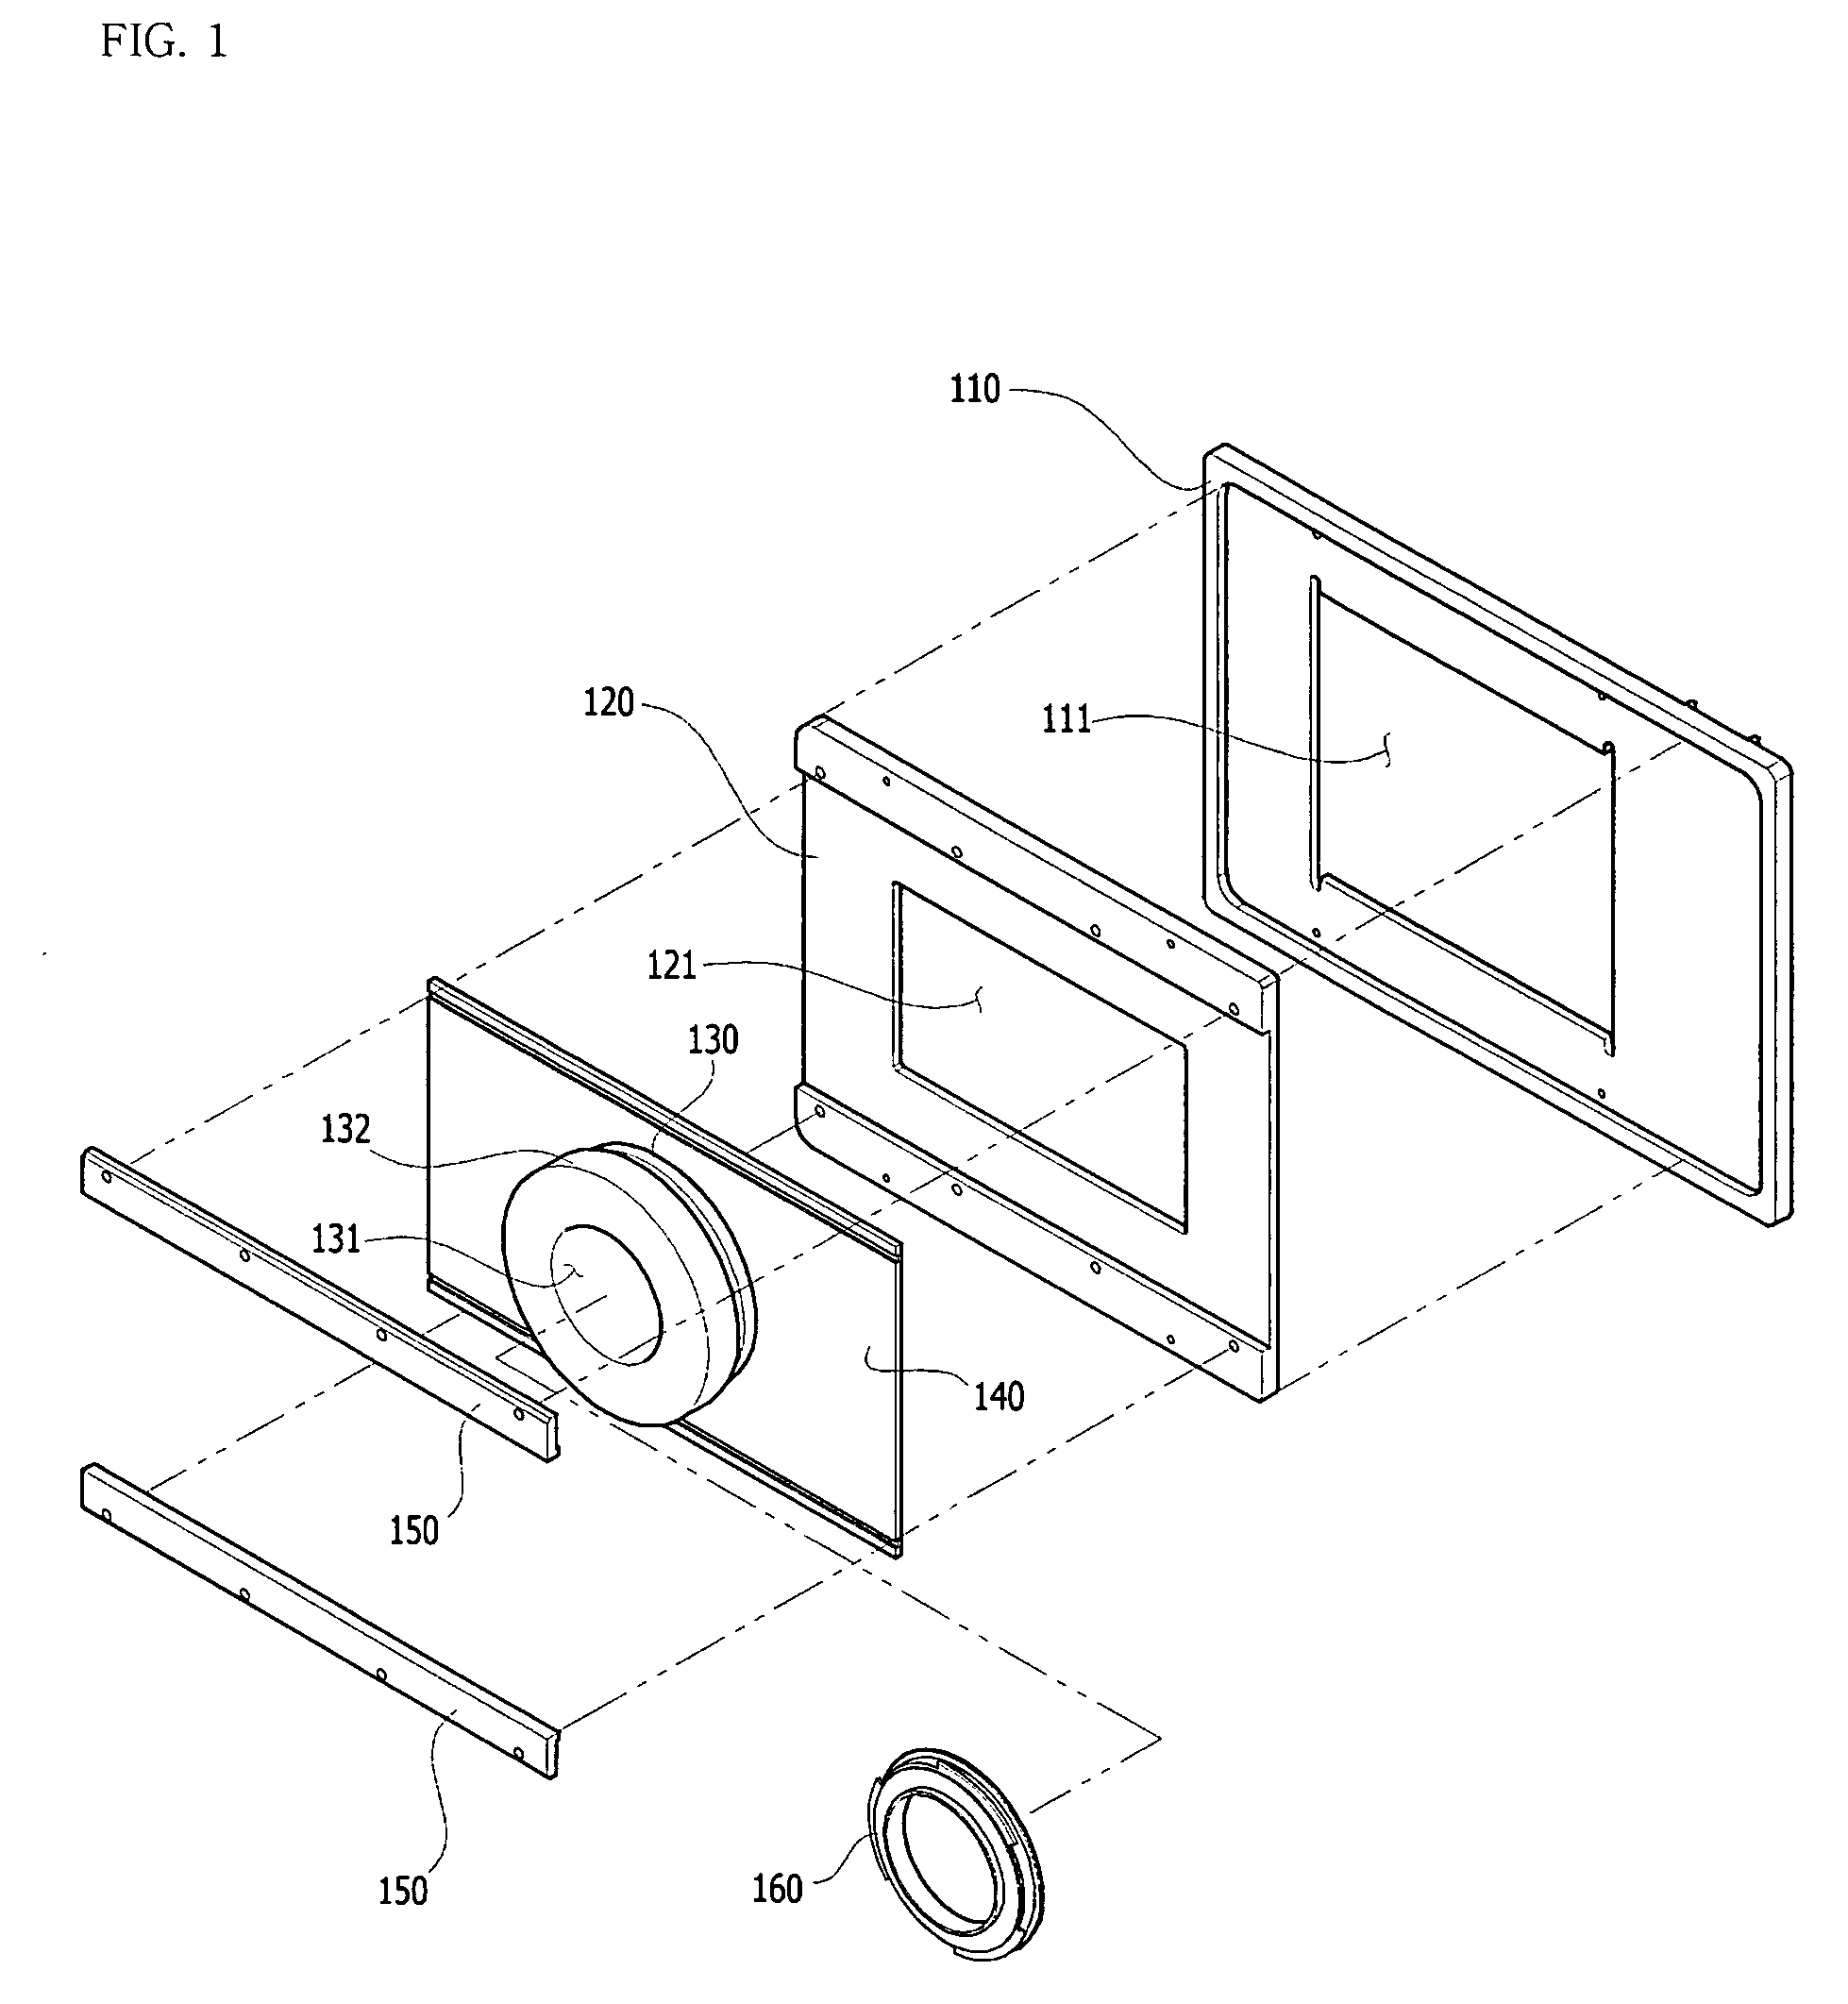 Connector panel for view camera capable of docking digital single lens reflex camera